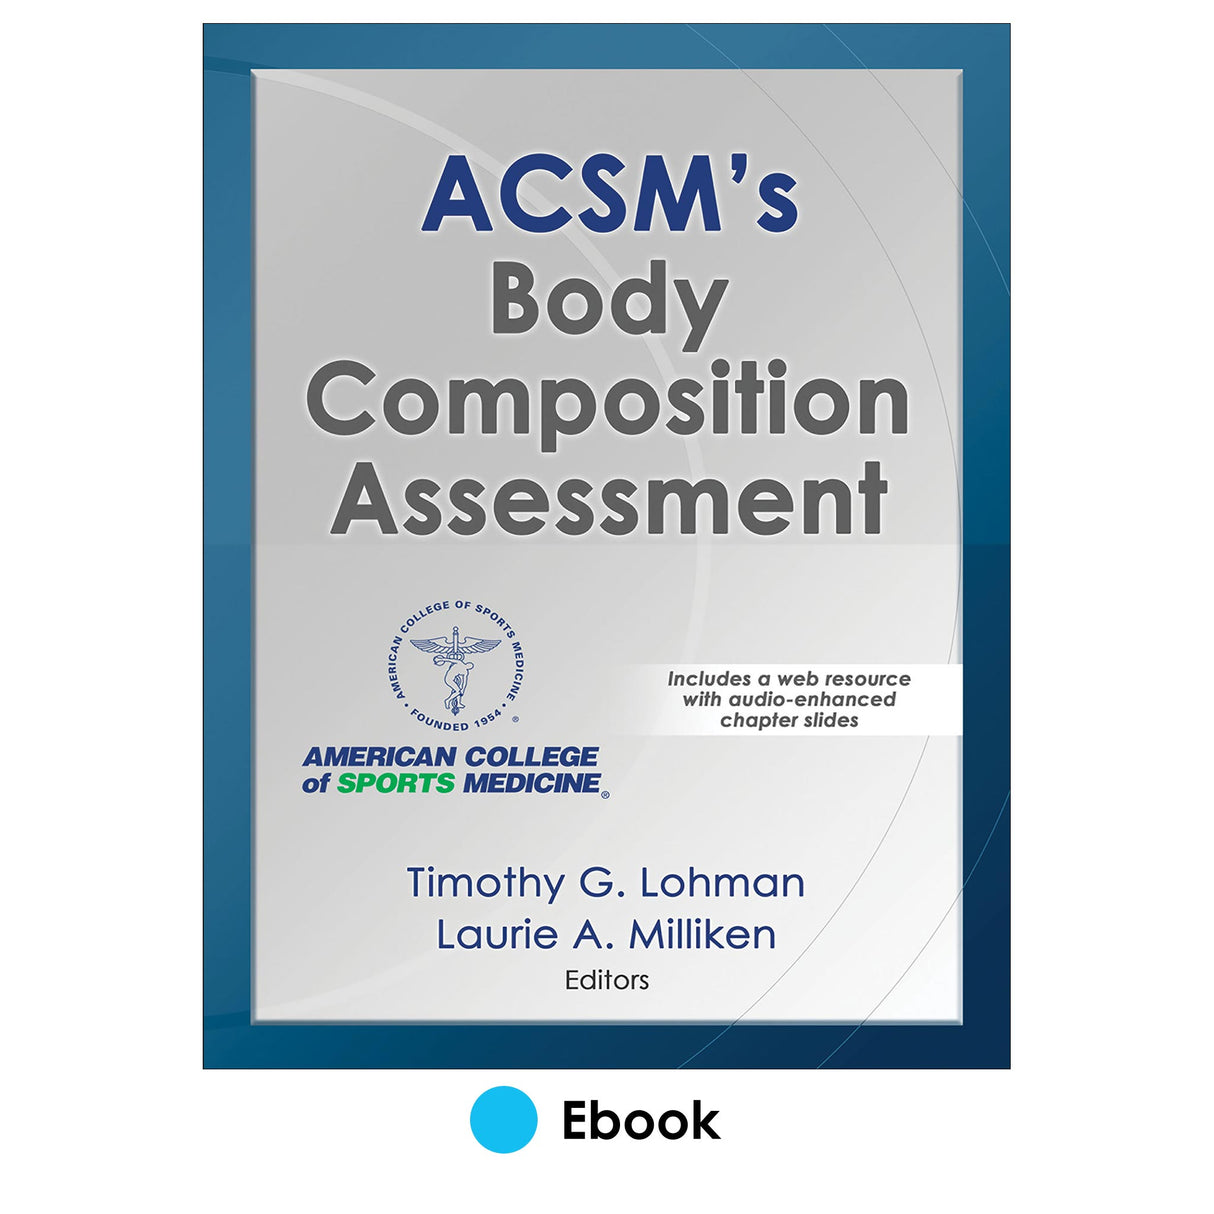 ACSM's Body Composition Assessment epub With Web Resource